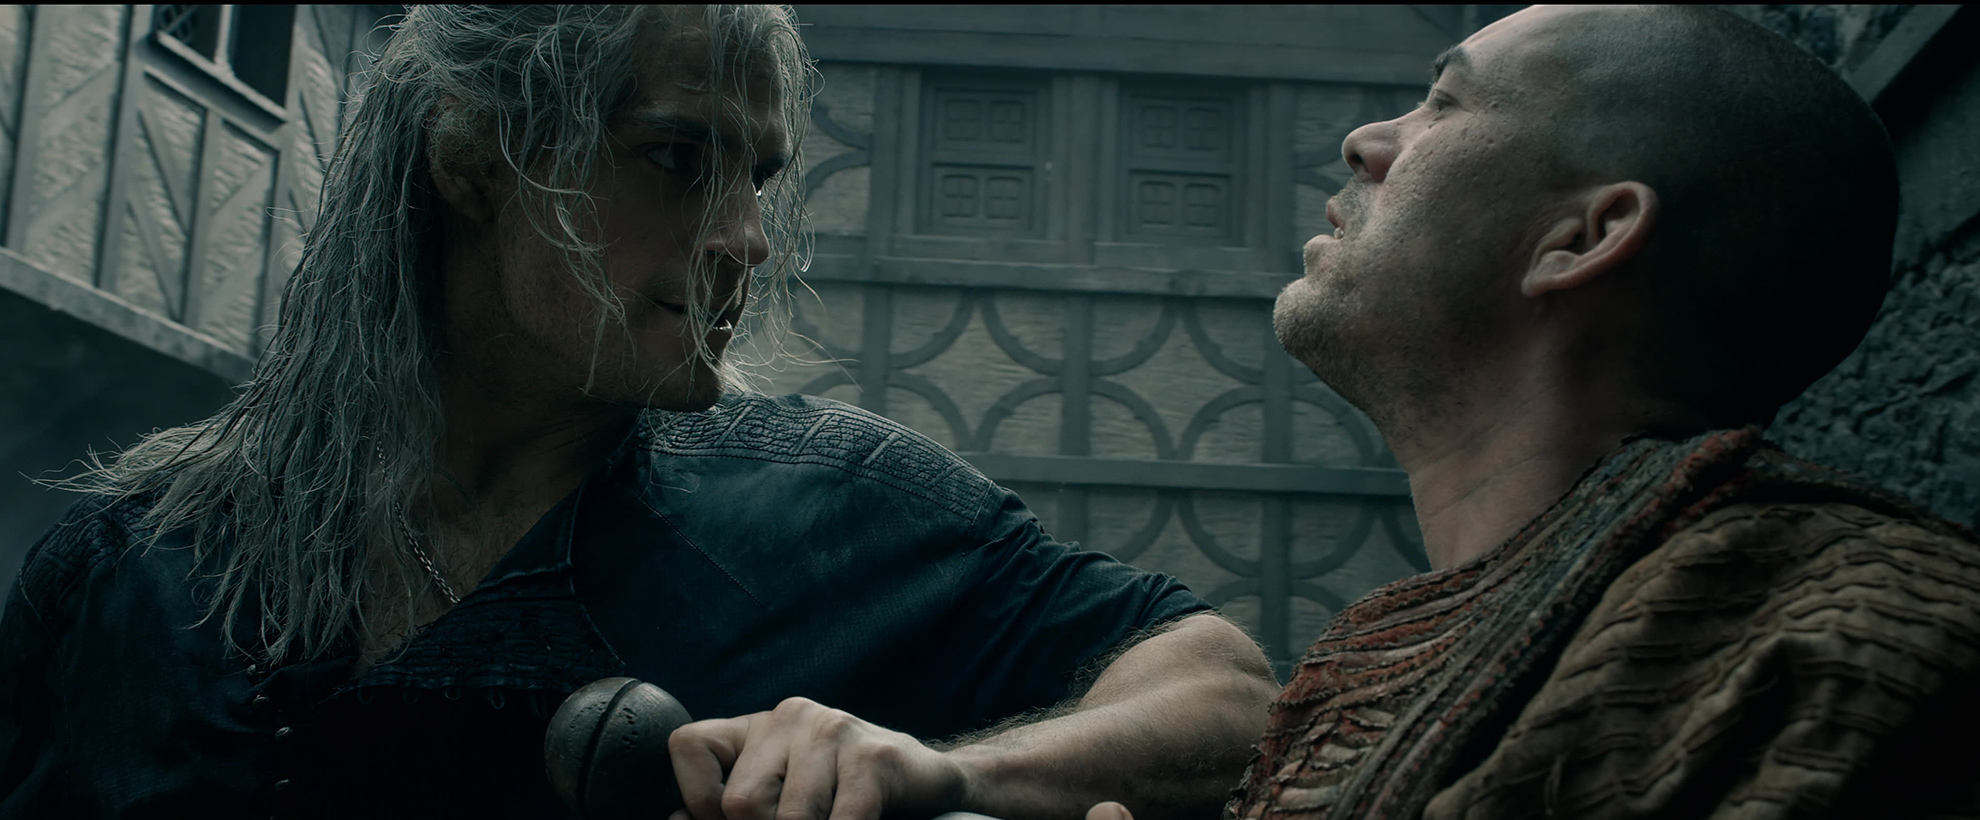 Henry Cavill holds a knife up to another man's chest in The Witcher